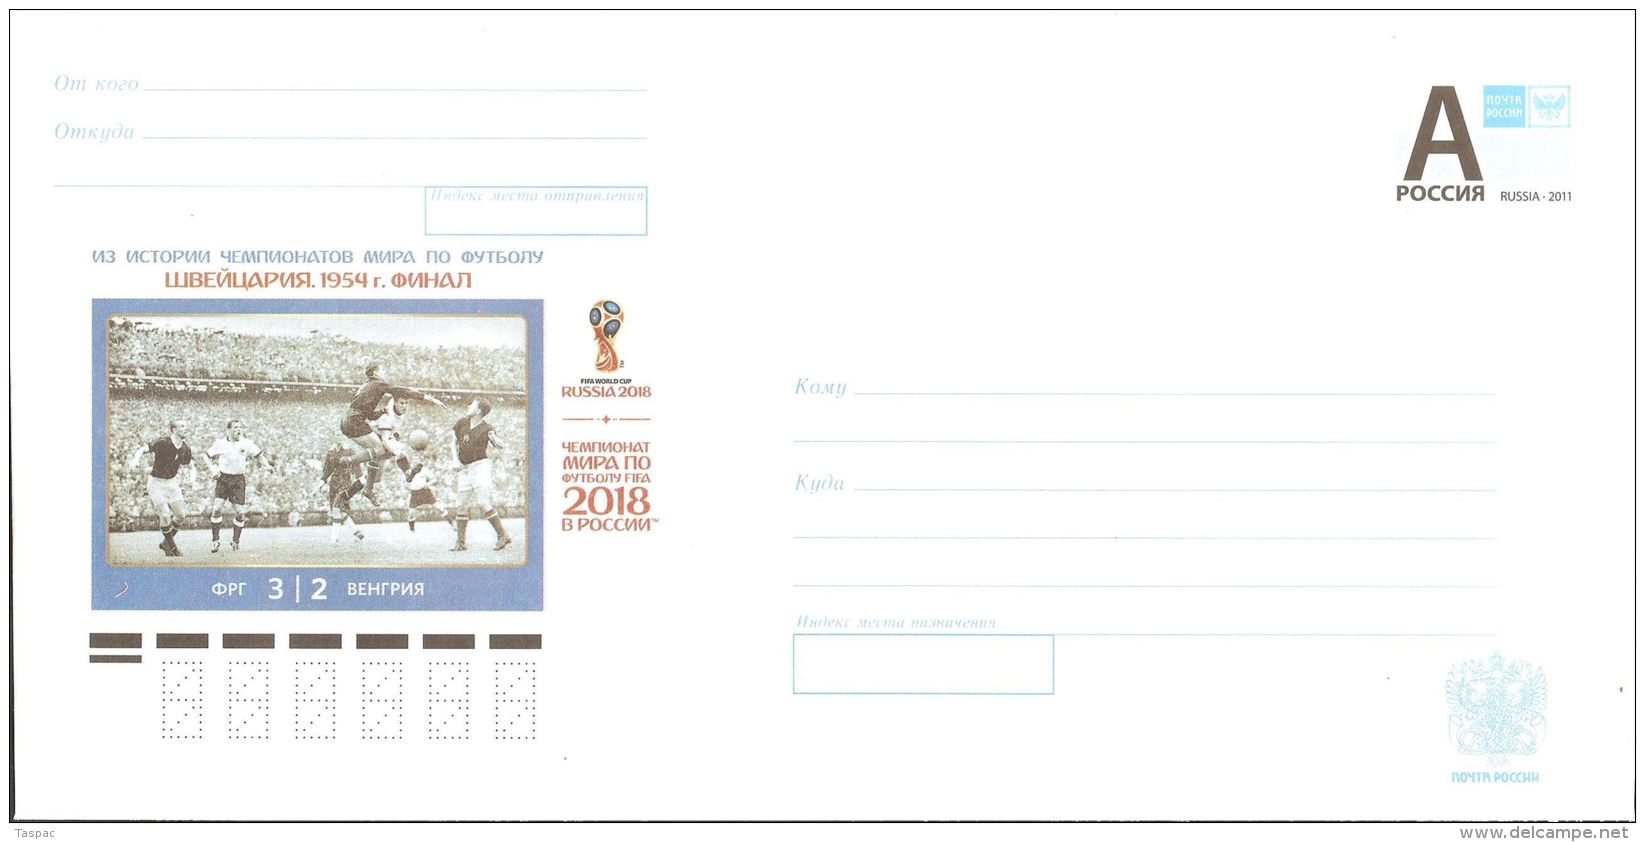 Russia 2015 # 147 Postal Stationery Cover Unused - History Of World Cup Soccer Championship, Switzerland 1954 - 1954 – Suiza